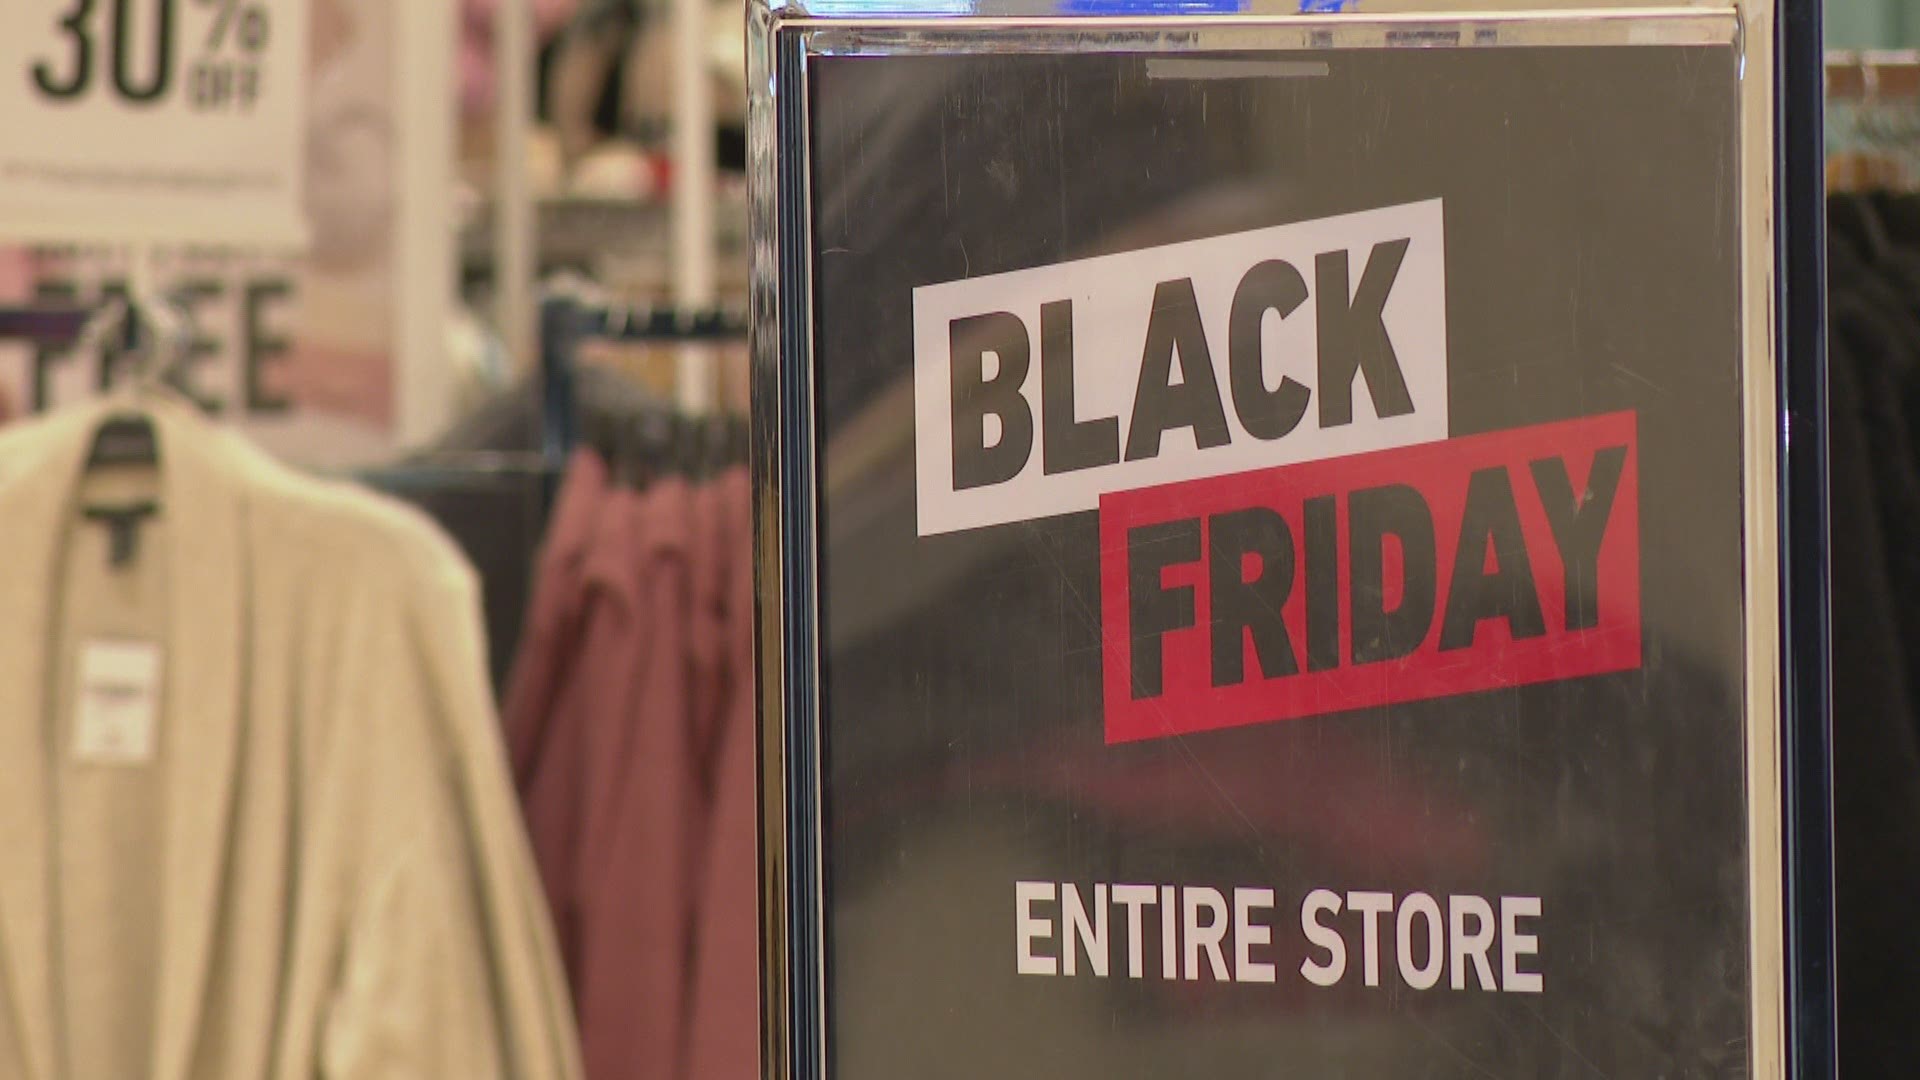 Black Friday will look different this year because of the pandemic: capacity limits, enhanced cleaning, and limited hours.